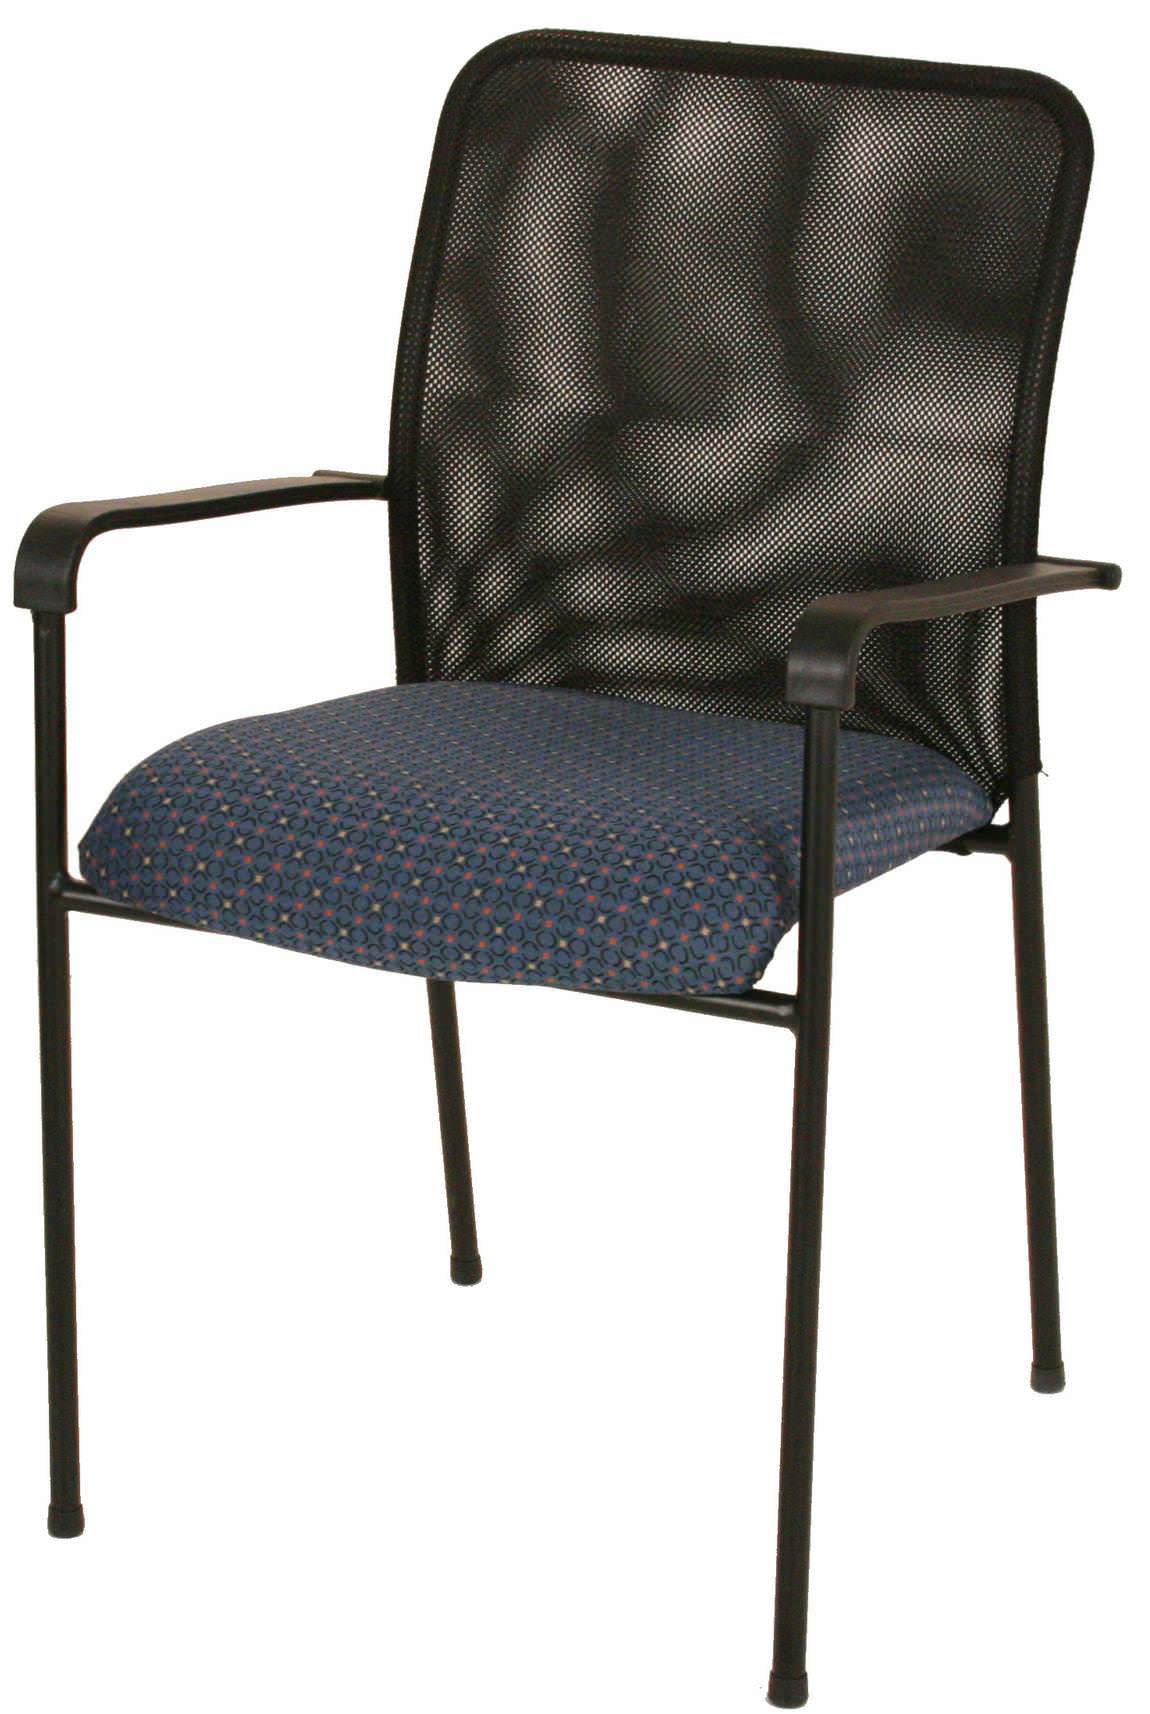 Upholstered Stacking Chair with Mesh Back